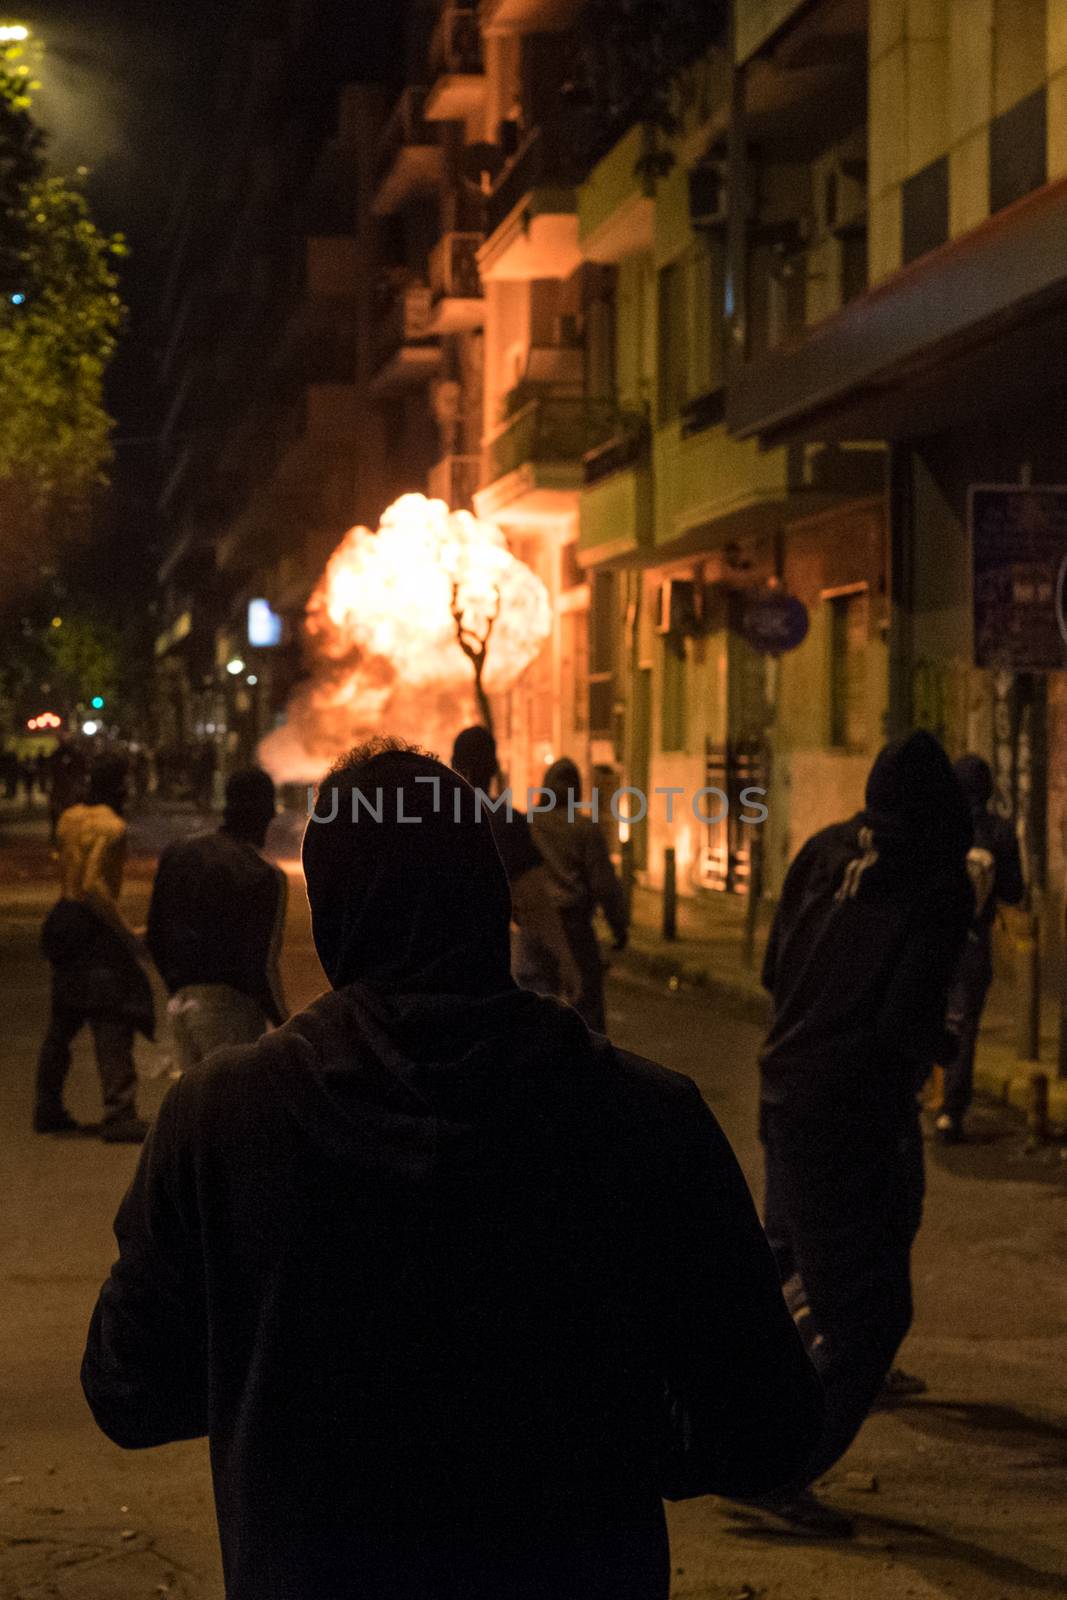 GREECE, Athens: Fire burns in the streets during clashes between protesters and police after a march marking the seventh anniversary of the police shooting of Alexis Grigoropoulos in Athens on December 6, 2015. Thousands of protesters converged on Syntagma Square earlier in the day before violence erupted in Exarcheia, the neighbourhood where Grigoropoulos, then 15, was fatally shot by police on December 6, 2008. 